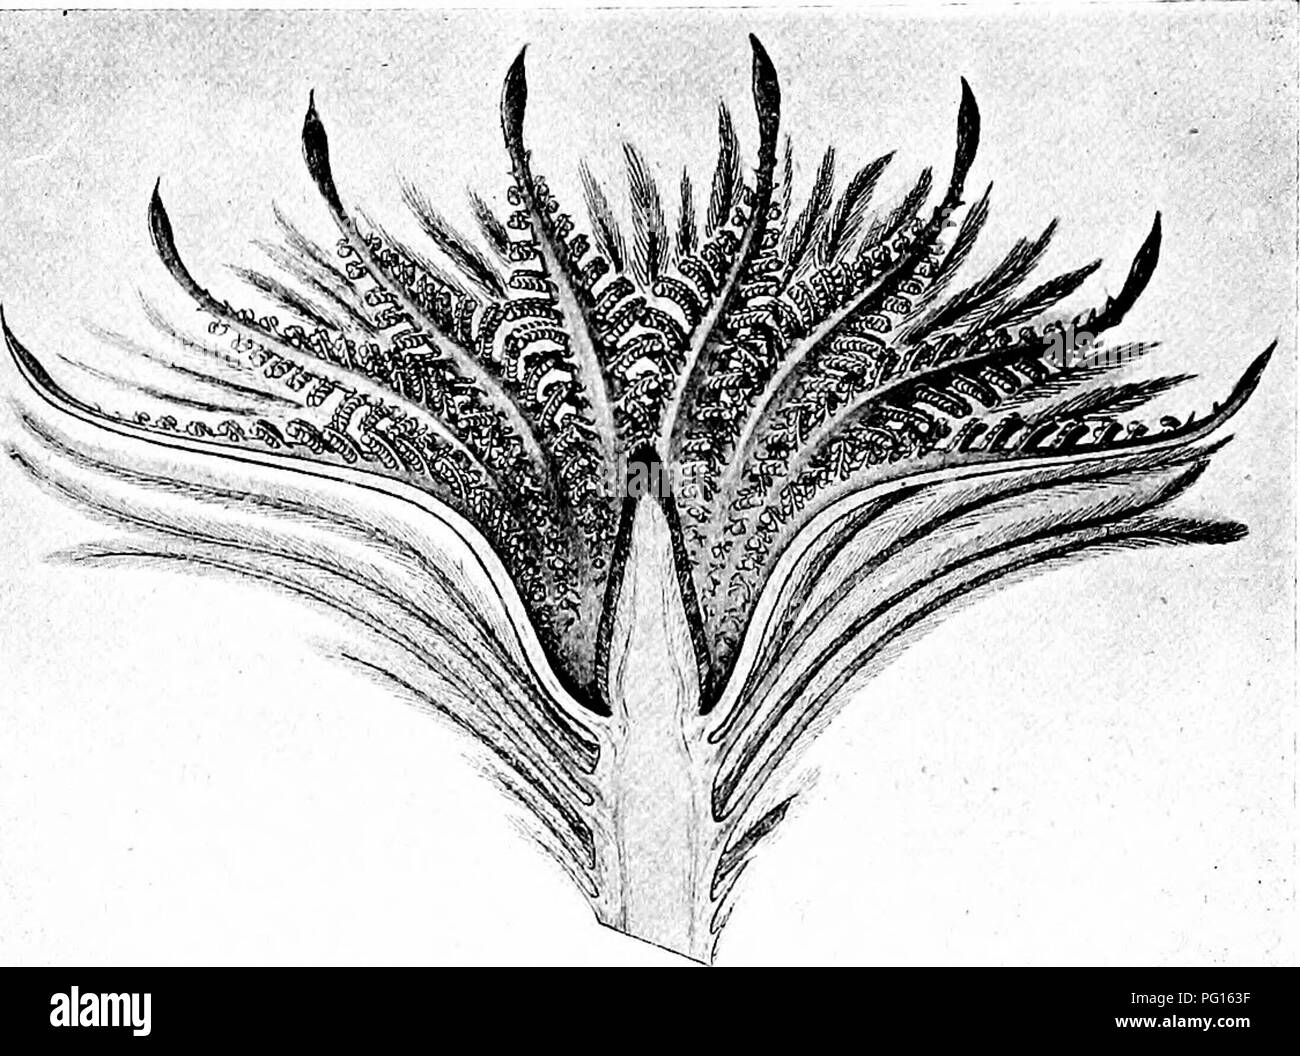 . Studies in fossil botany . Paleobotany. SS4 STUDIES IN FOSSIL BOTANY pinnae, directed inwards from the concave side of the whole organ (Figs. 206 and 207 ; cf. the diagrams, Figs. 208 and 209). The apical and basal pinnae are sterile; all the rest bear synangia, arranged in two rows, the synangia numbering about ten in each row. Flu. 208.—Cycadcoufca iugens.—Restoration of an expanded bisexual flower in longi- tudinal section, showing the central ovtiliferous cone, the hypogynous whorl of pinna tely compound stamens, bearing numerous synangia, and the surrounding bracts, hairy with ramenta.  Stock Photo